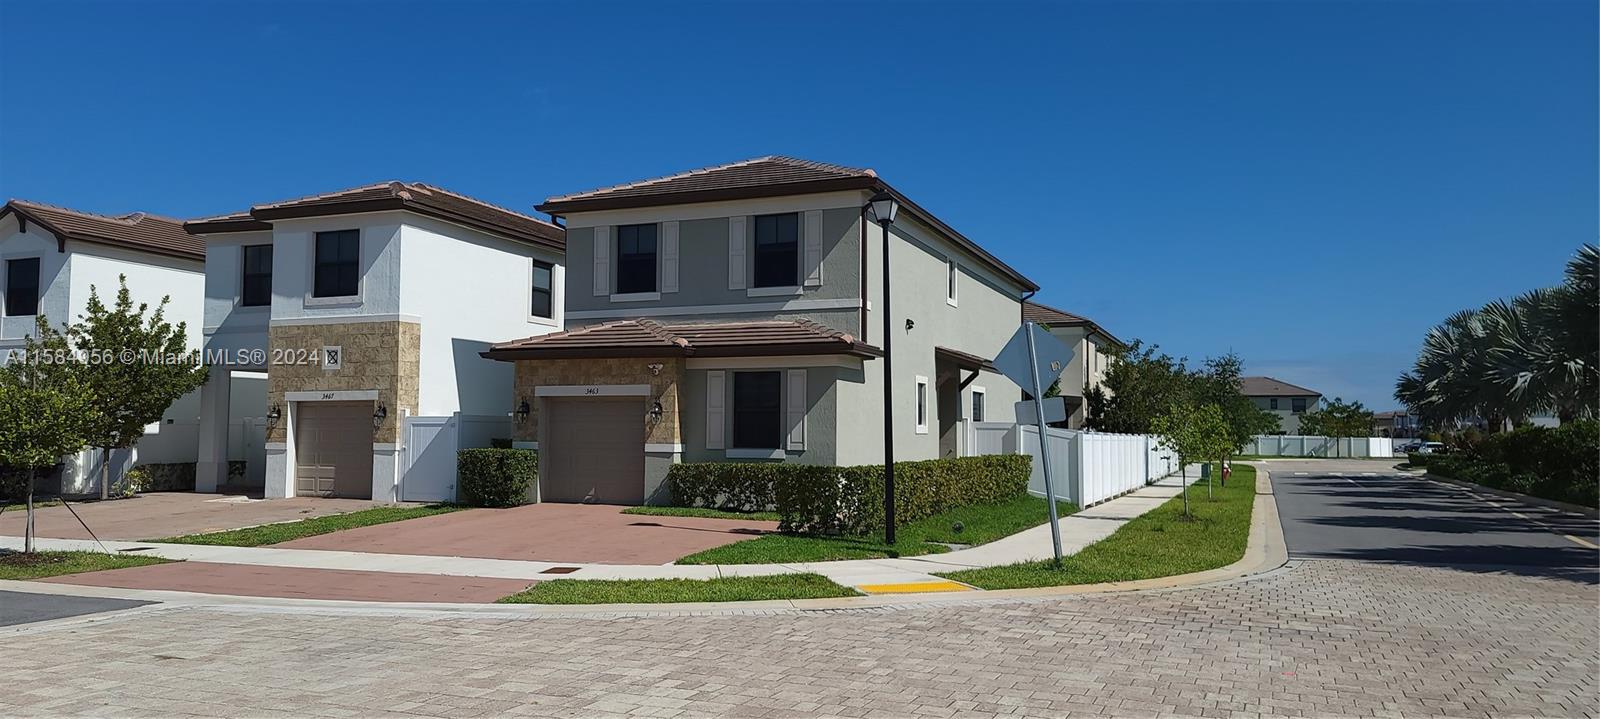 3463 W 110th St St, Hialeah, Miami-Dade County, Florida - 4 Bedrooms  
3 Bathrooms - 